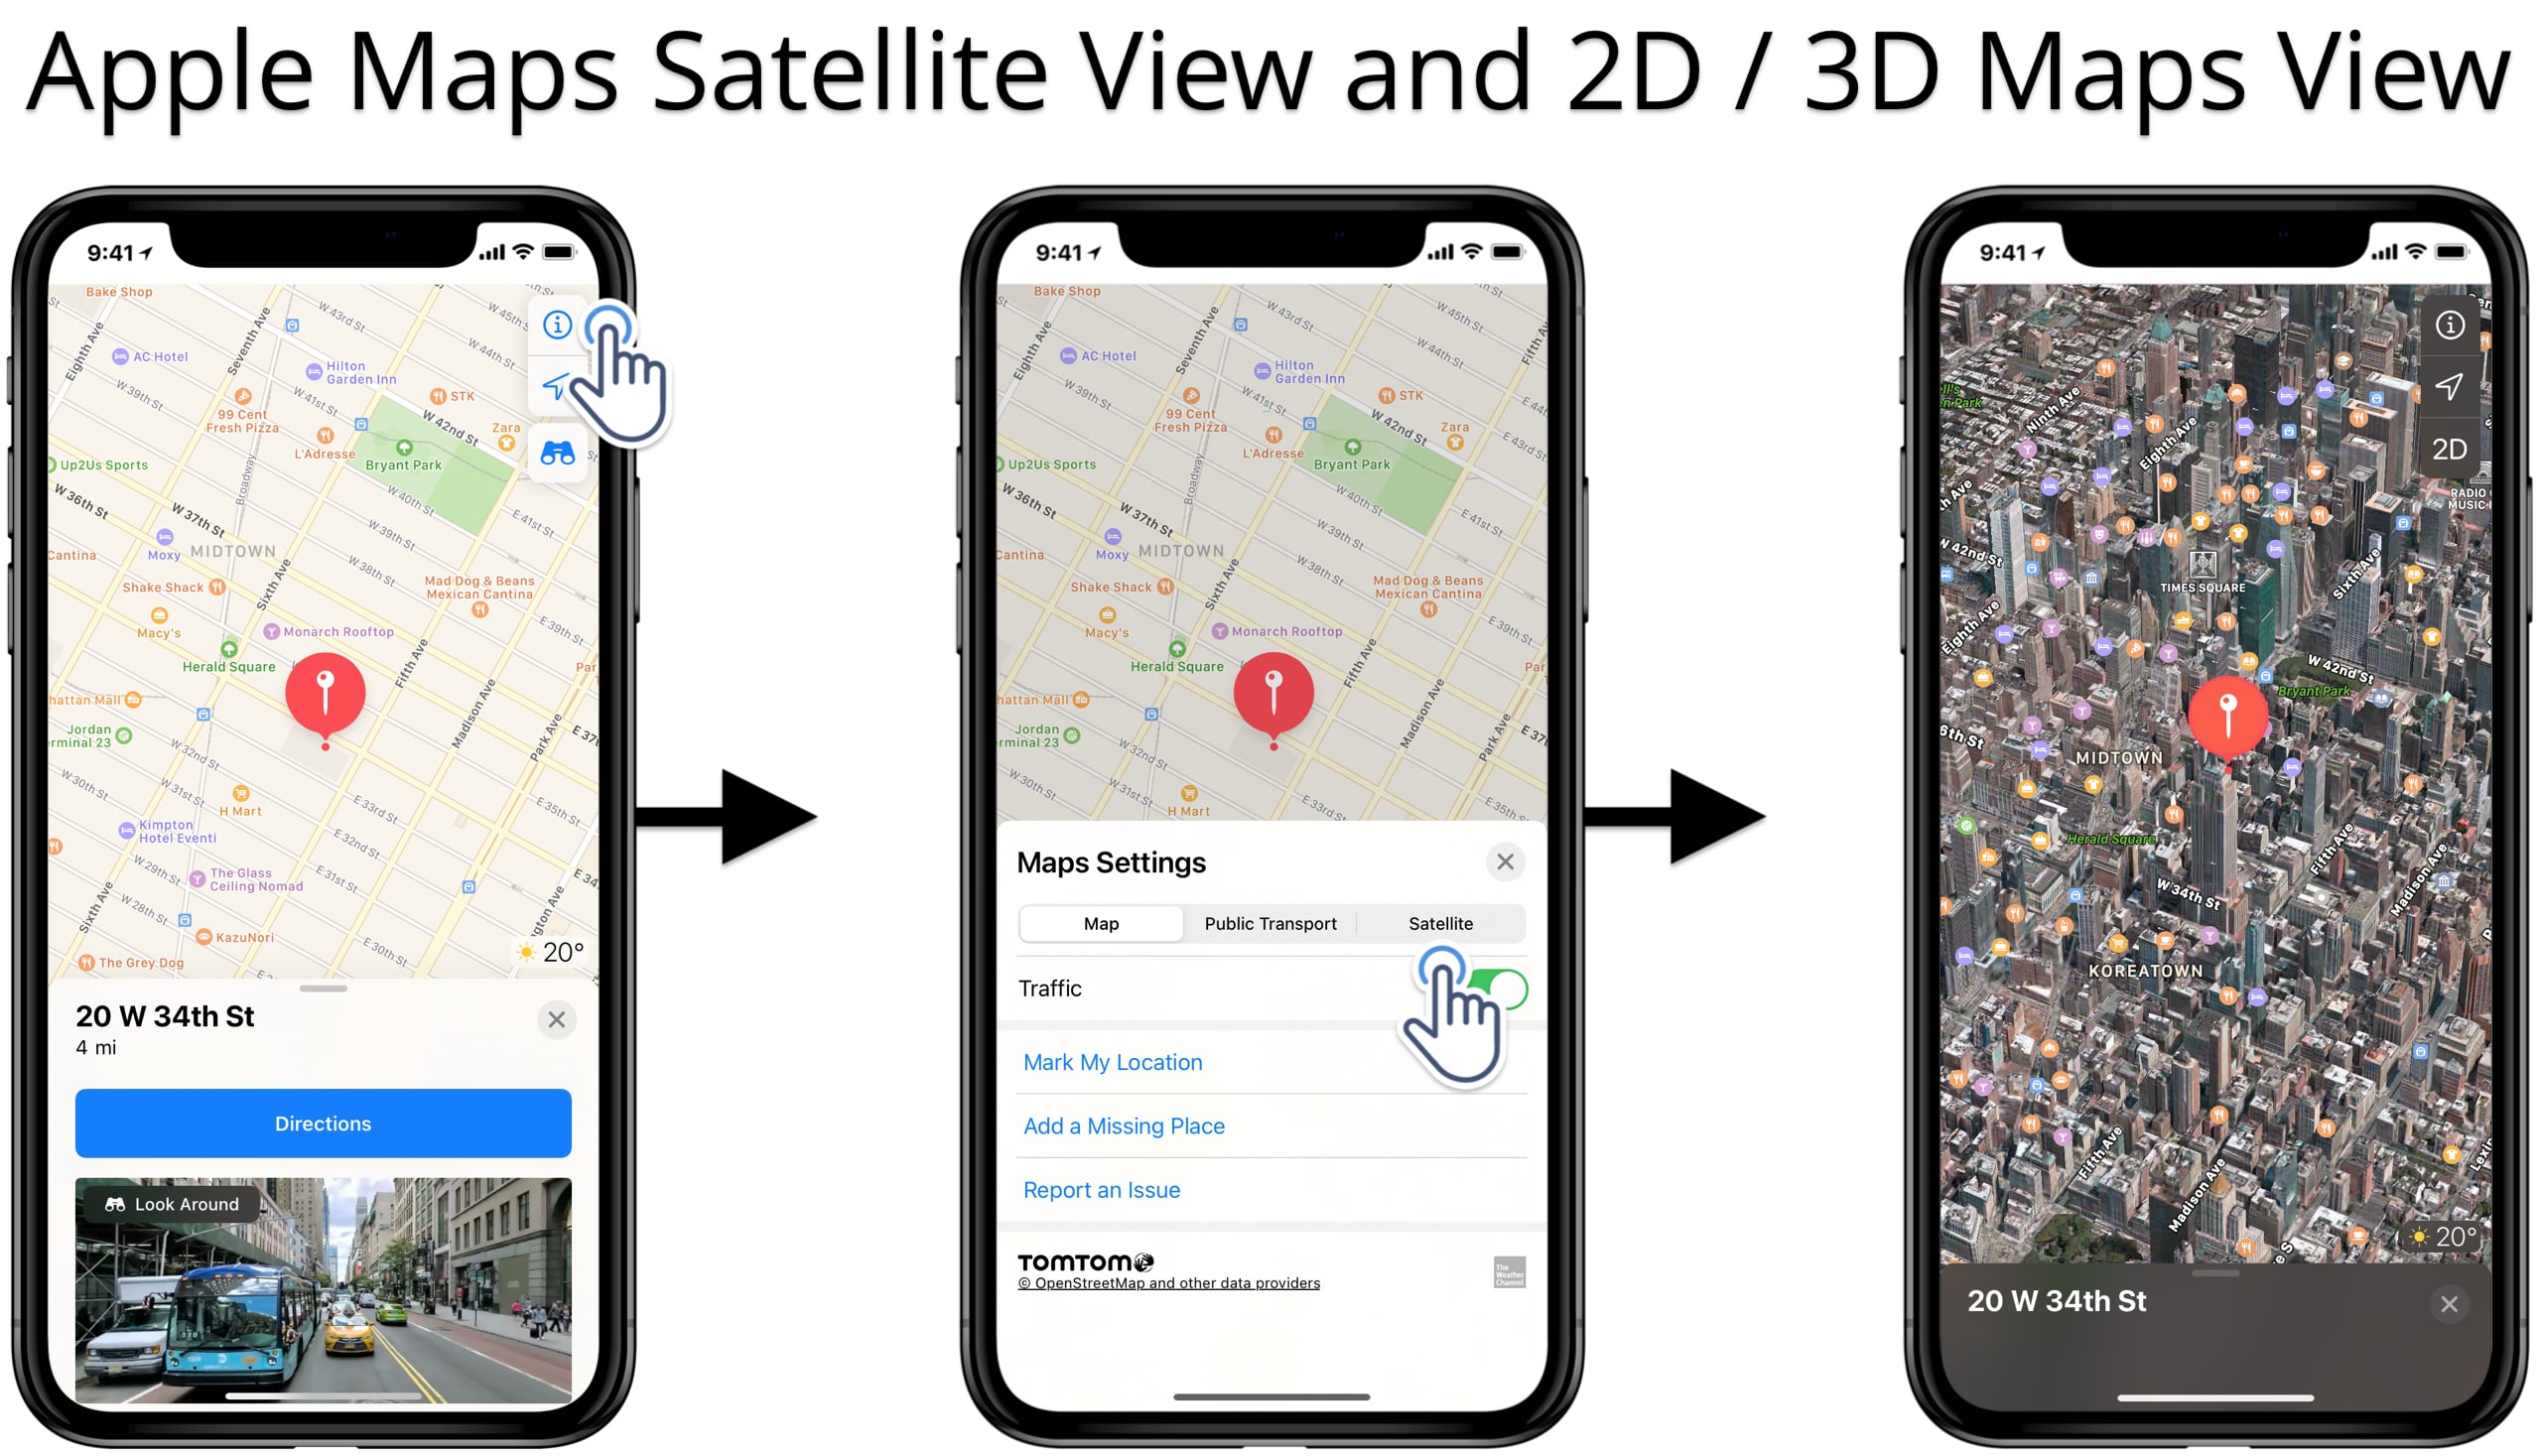 Apple Maps satellite view with 2D and 3D map view on the iPhone Maps app.